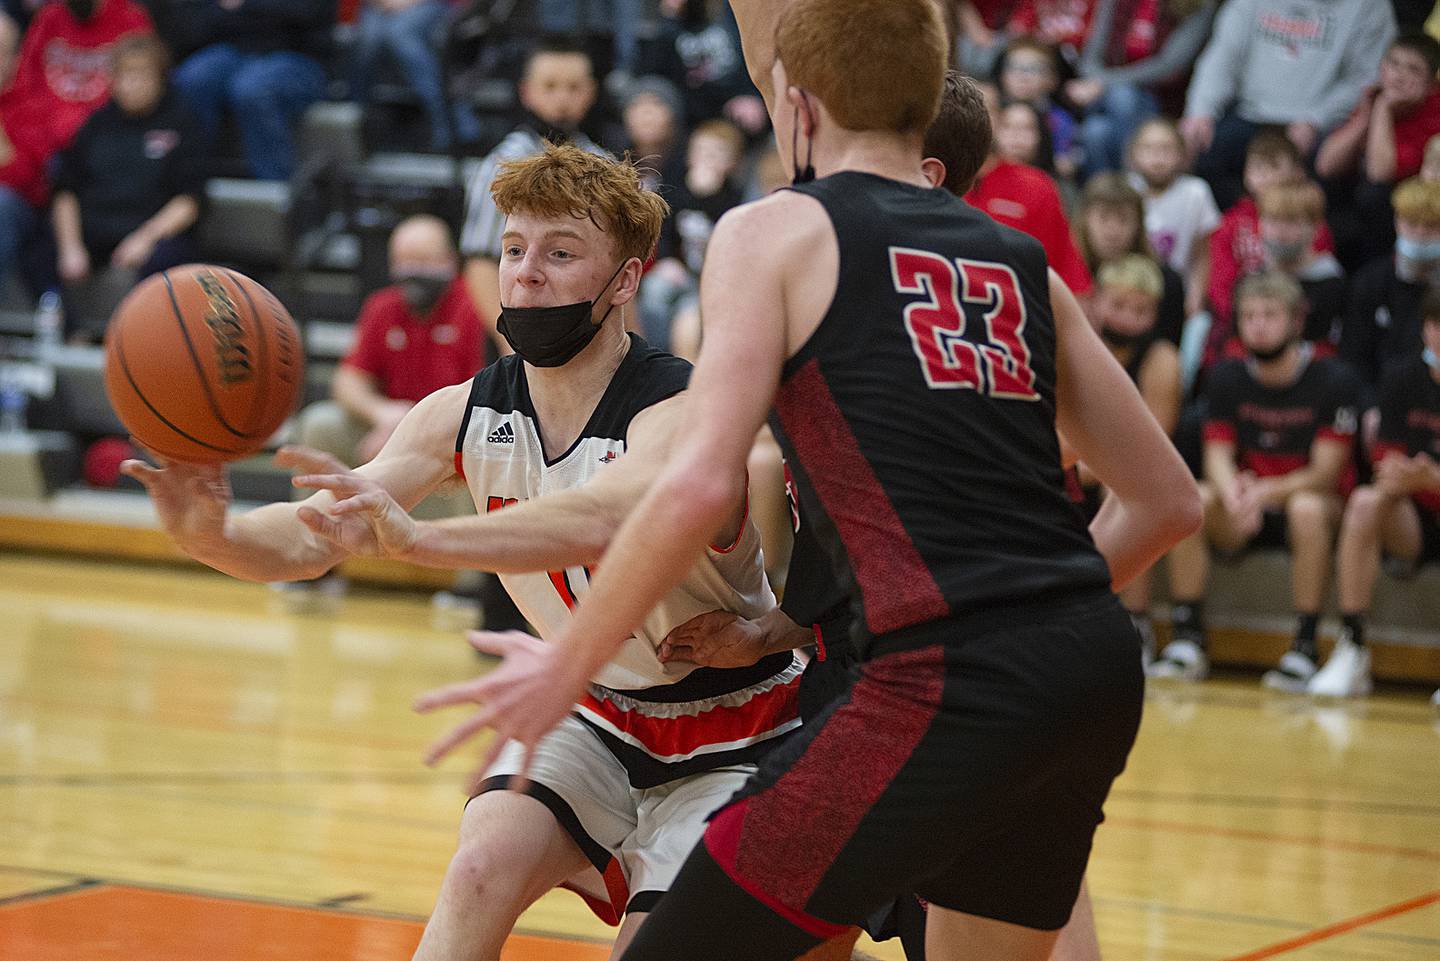 Milledgeville's Connor Nye makes a pass against Fulton on Monday, Jan. 17, 2022.